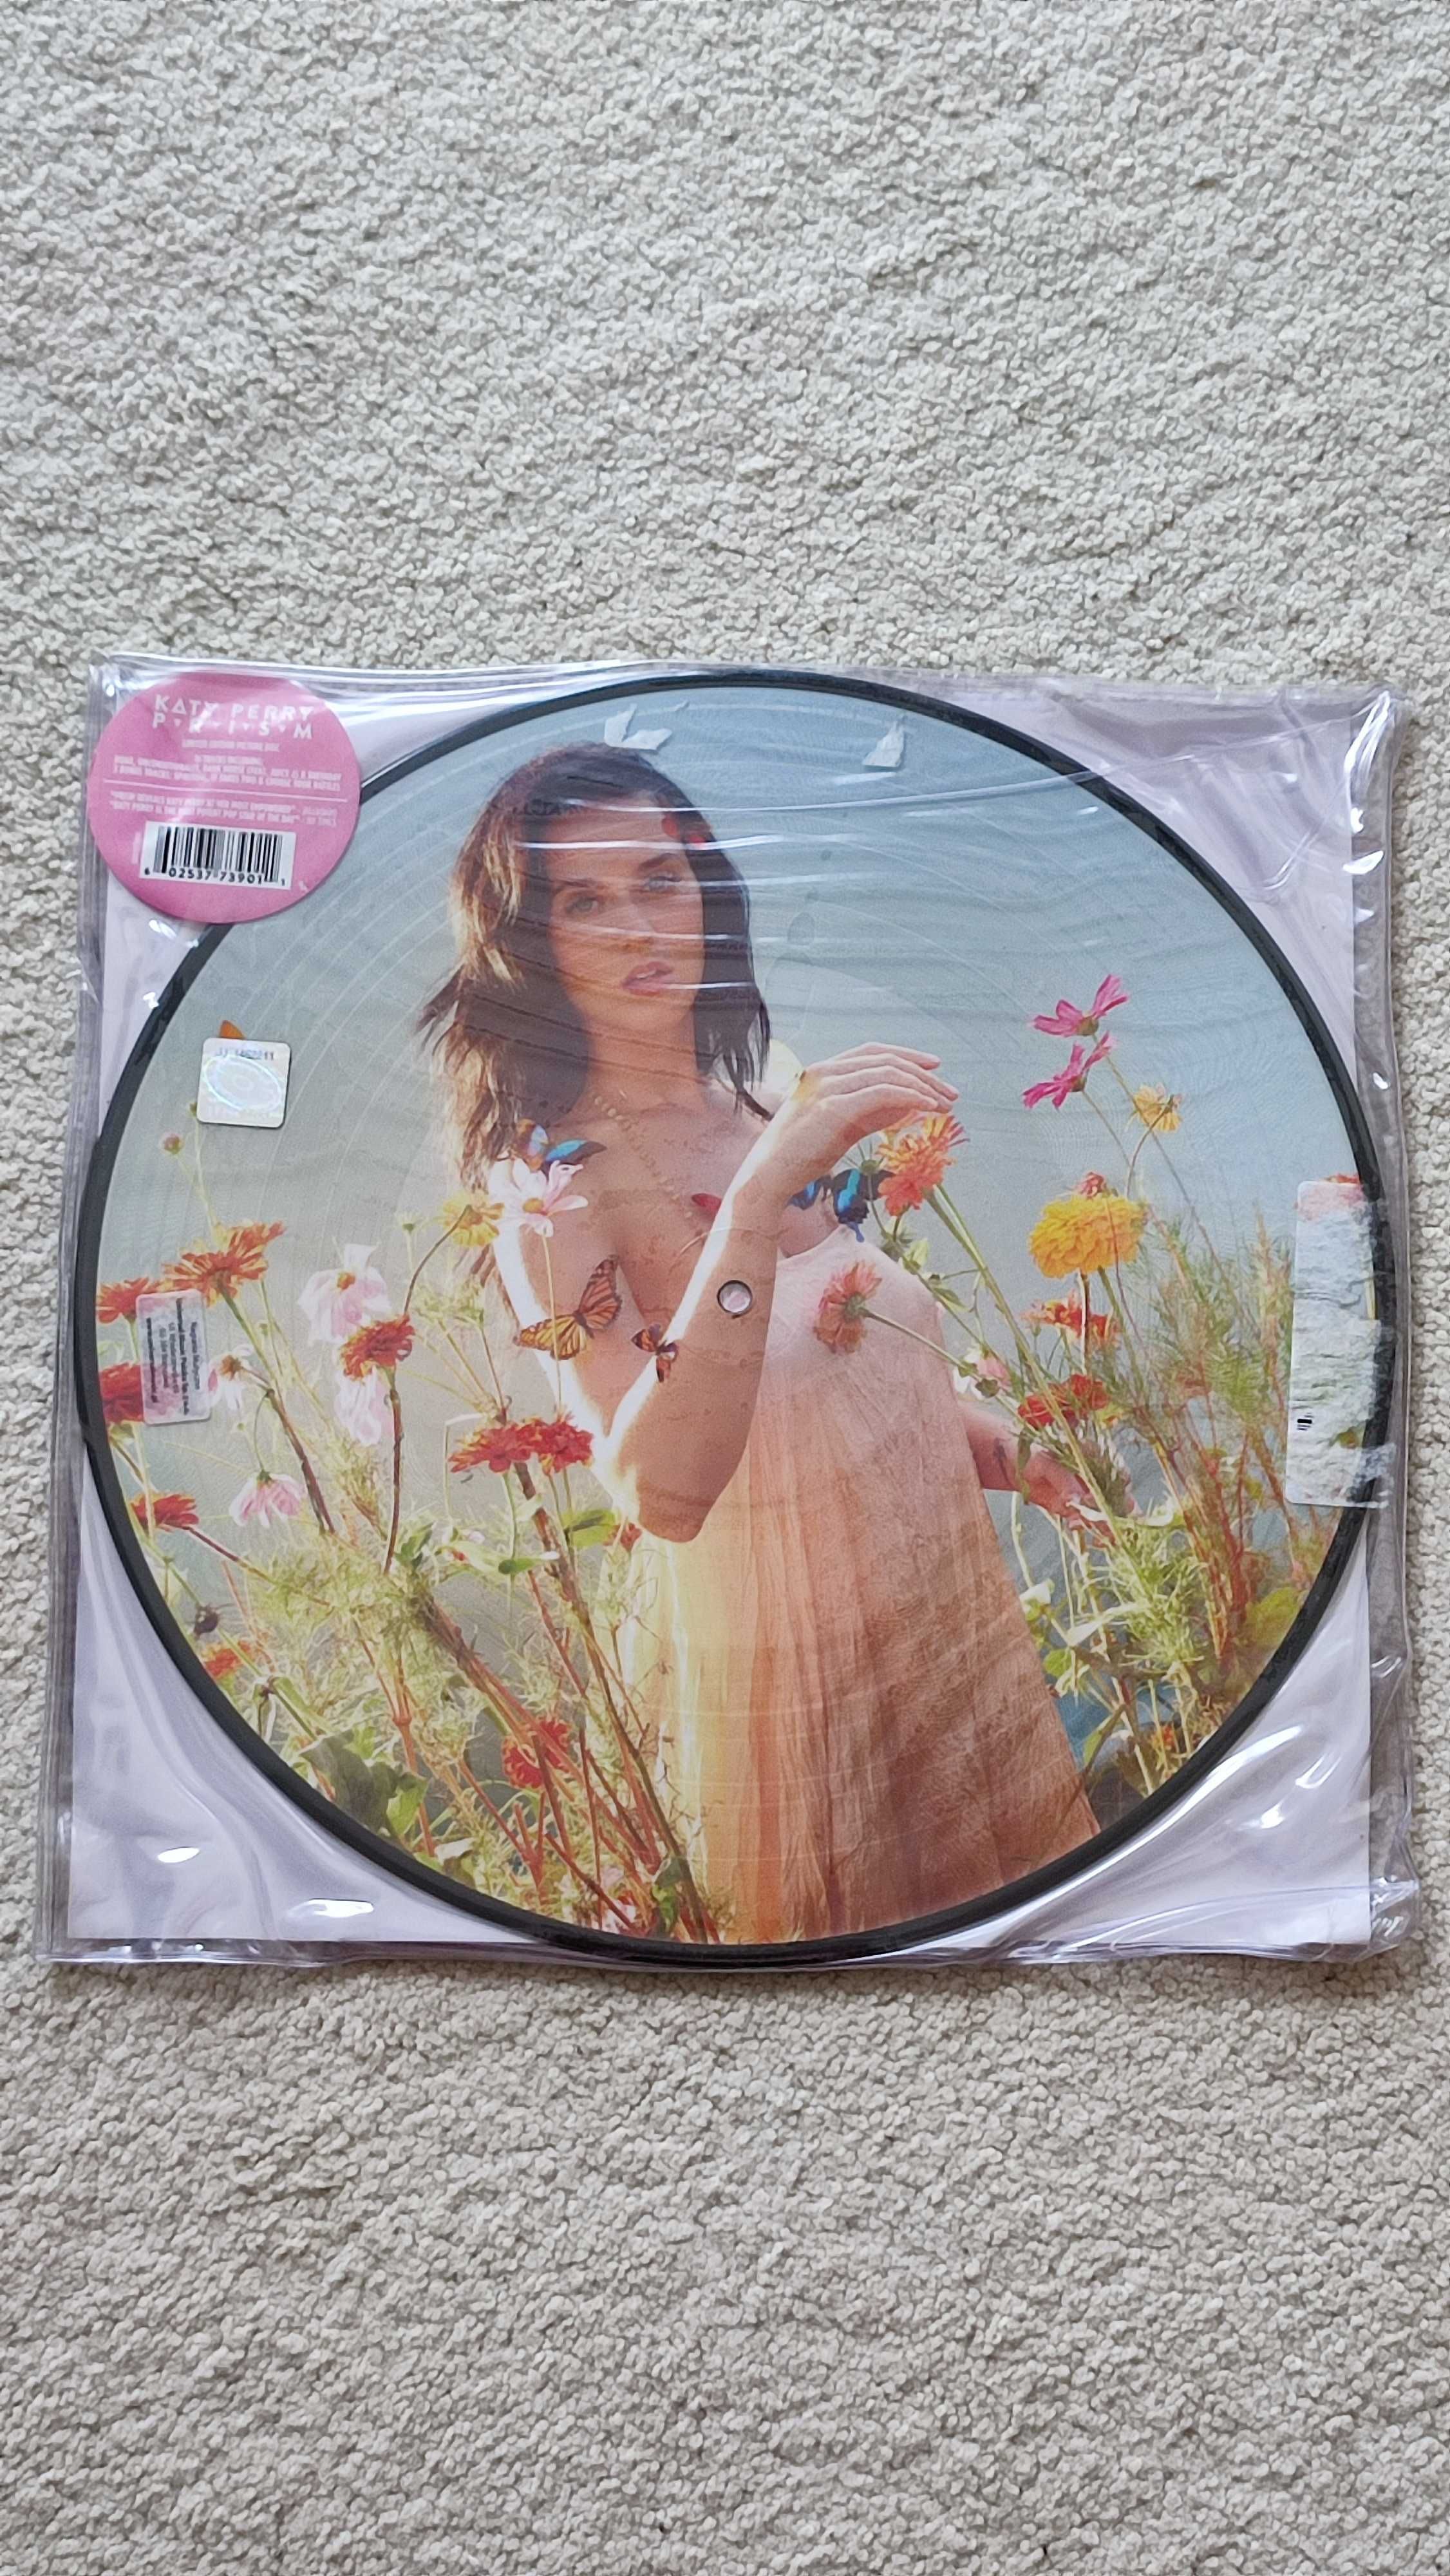 Katy Perry – Prism 2 x LP Winyl Limited Edition Picture Disc